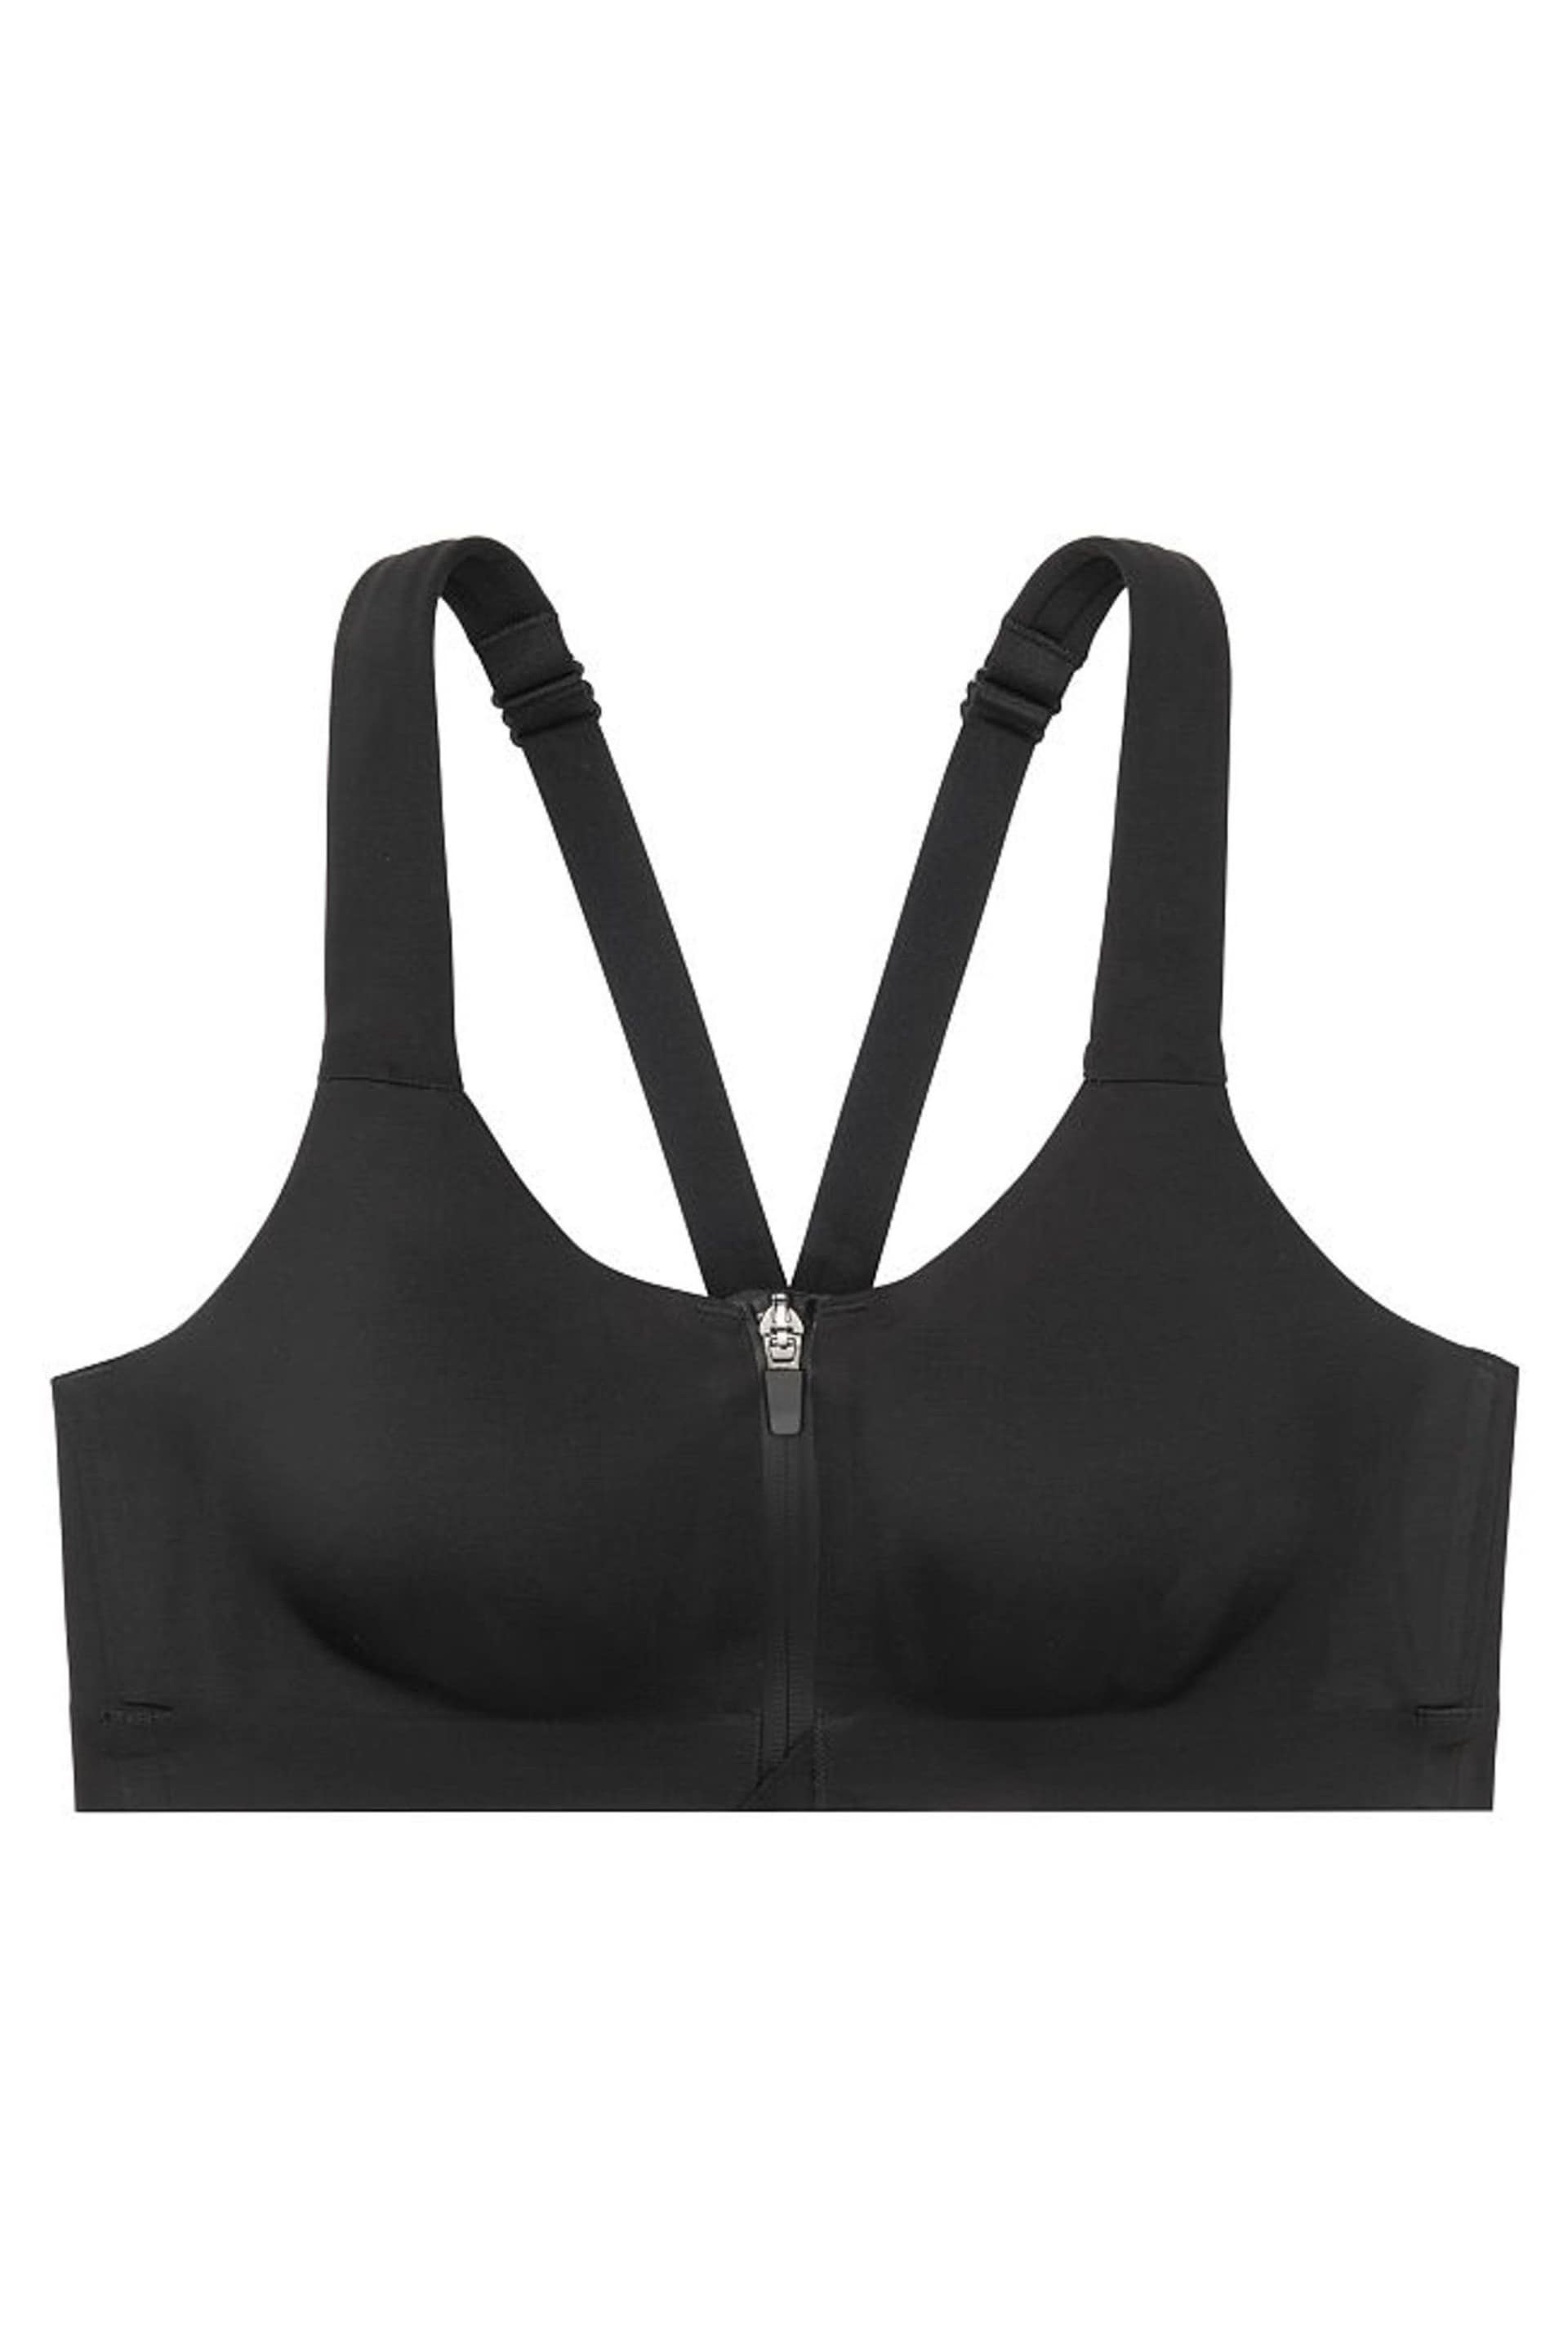 Victoria's Secret Black Smooth Front Fastening Wired High Impact Sports Bra - Image 3 of 4